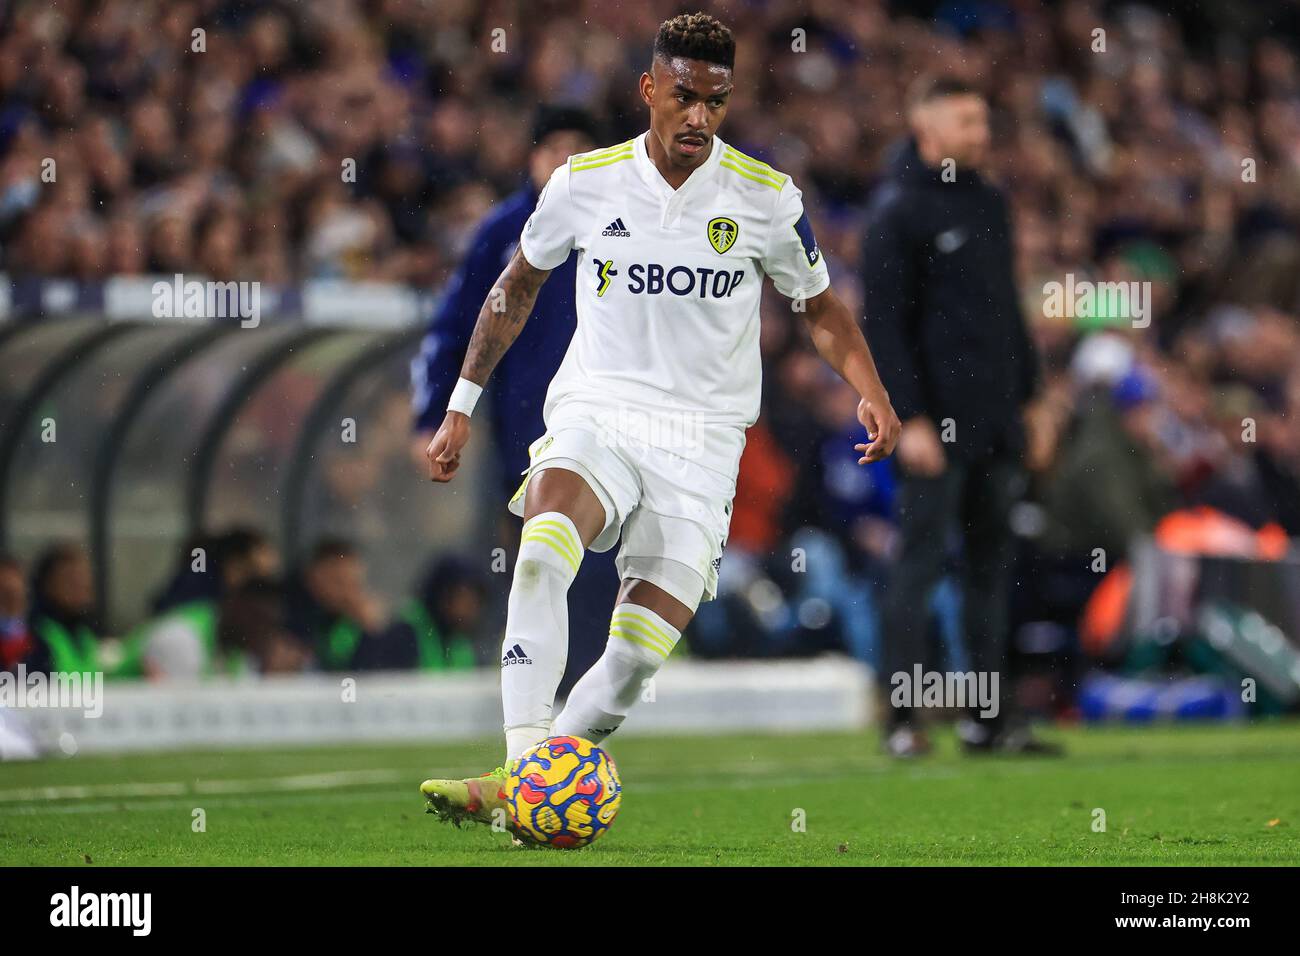 Junior Firpo #3 of Leeds United with the ball Stock Photo